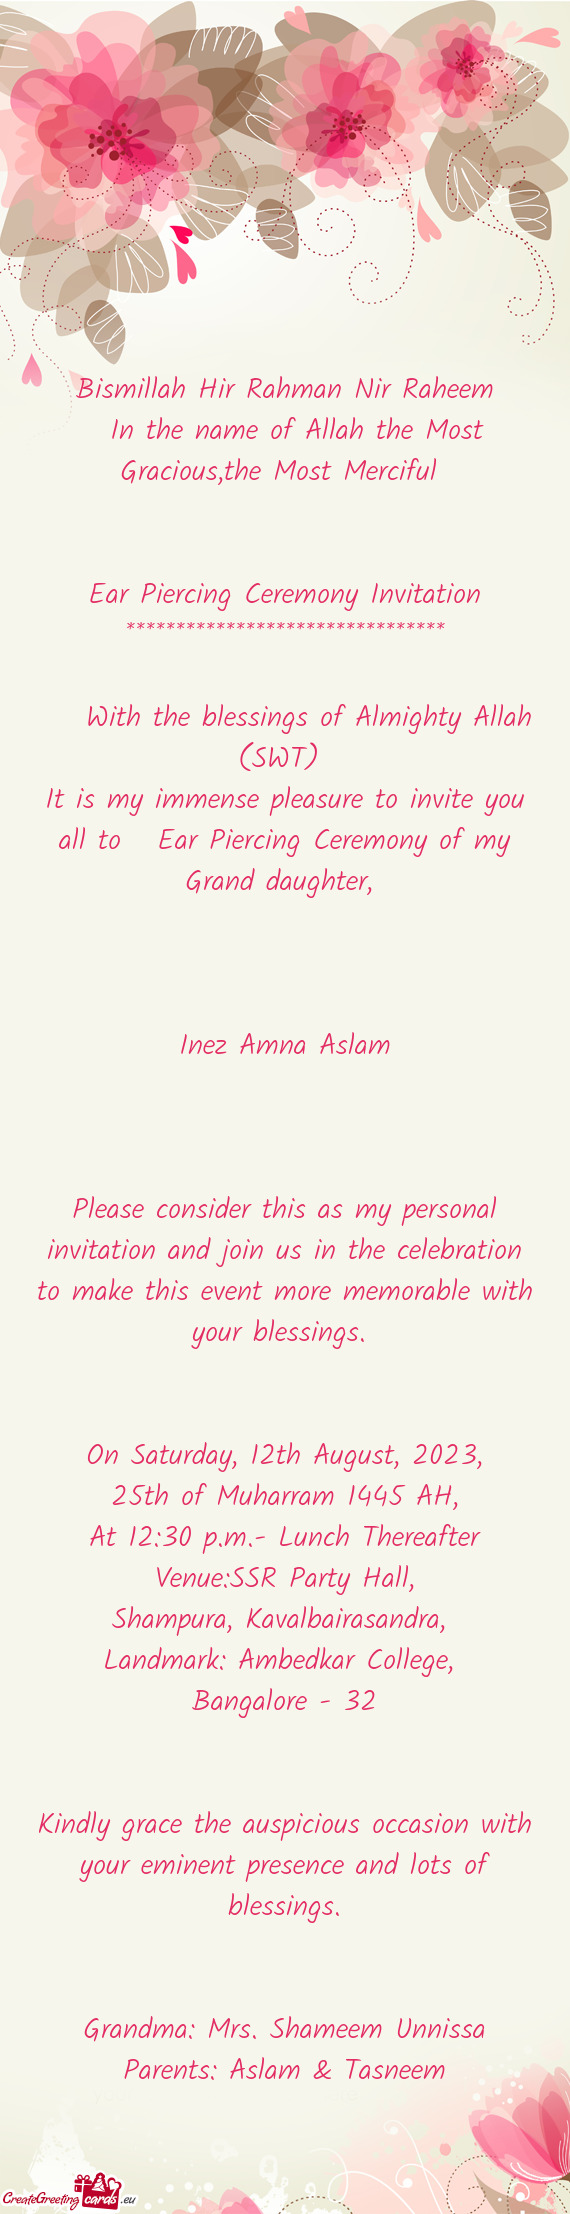 Please consider this as my personal invitation and join us in the celebration to make this event mor